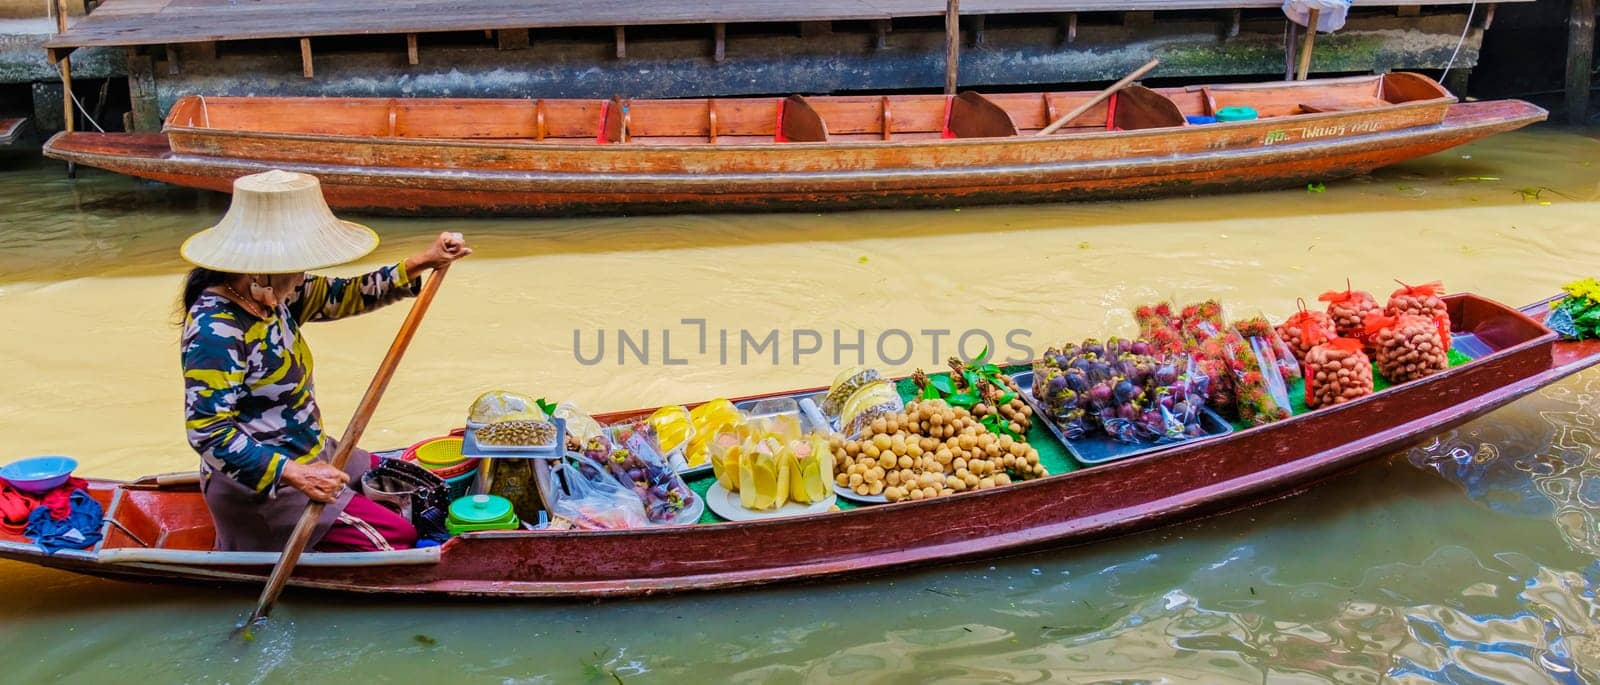 market stall holders in small boats selling local fruits and vegetables, Damnoen Saduak Floating Market, Thailand